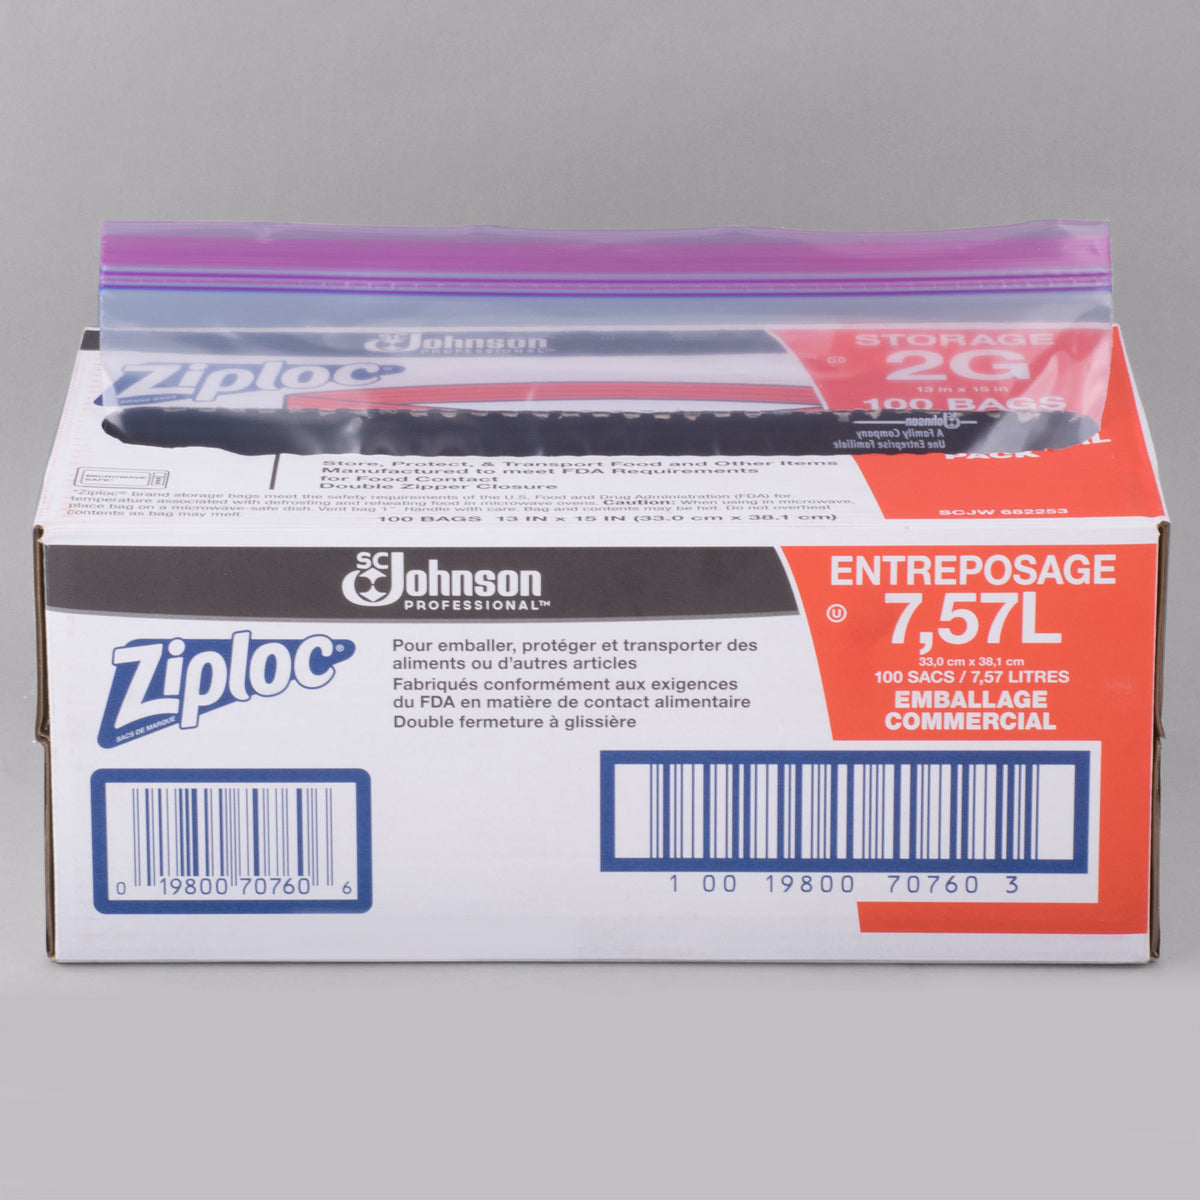 Pack of 100 Large Ziplock Bags 13 x 15 - 2 Mil - Plastic Bags with Zipper